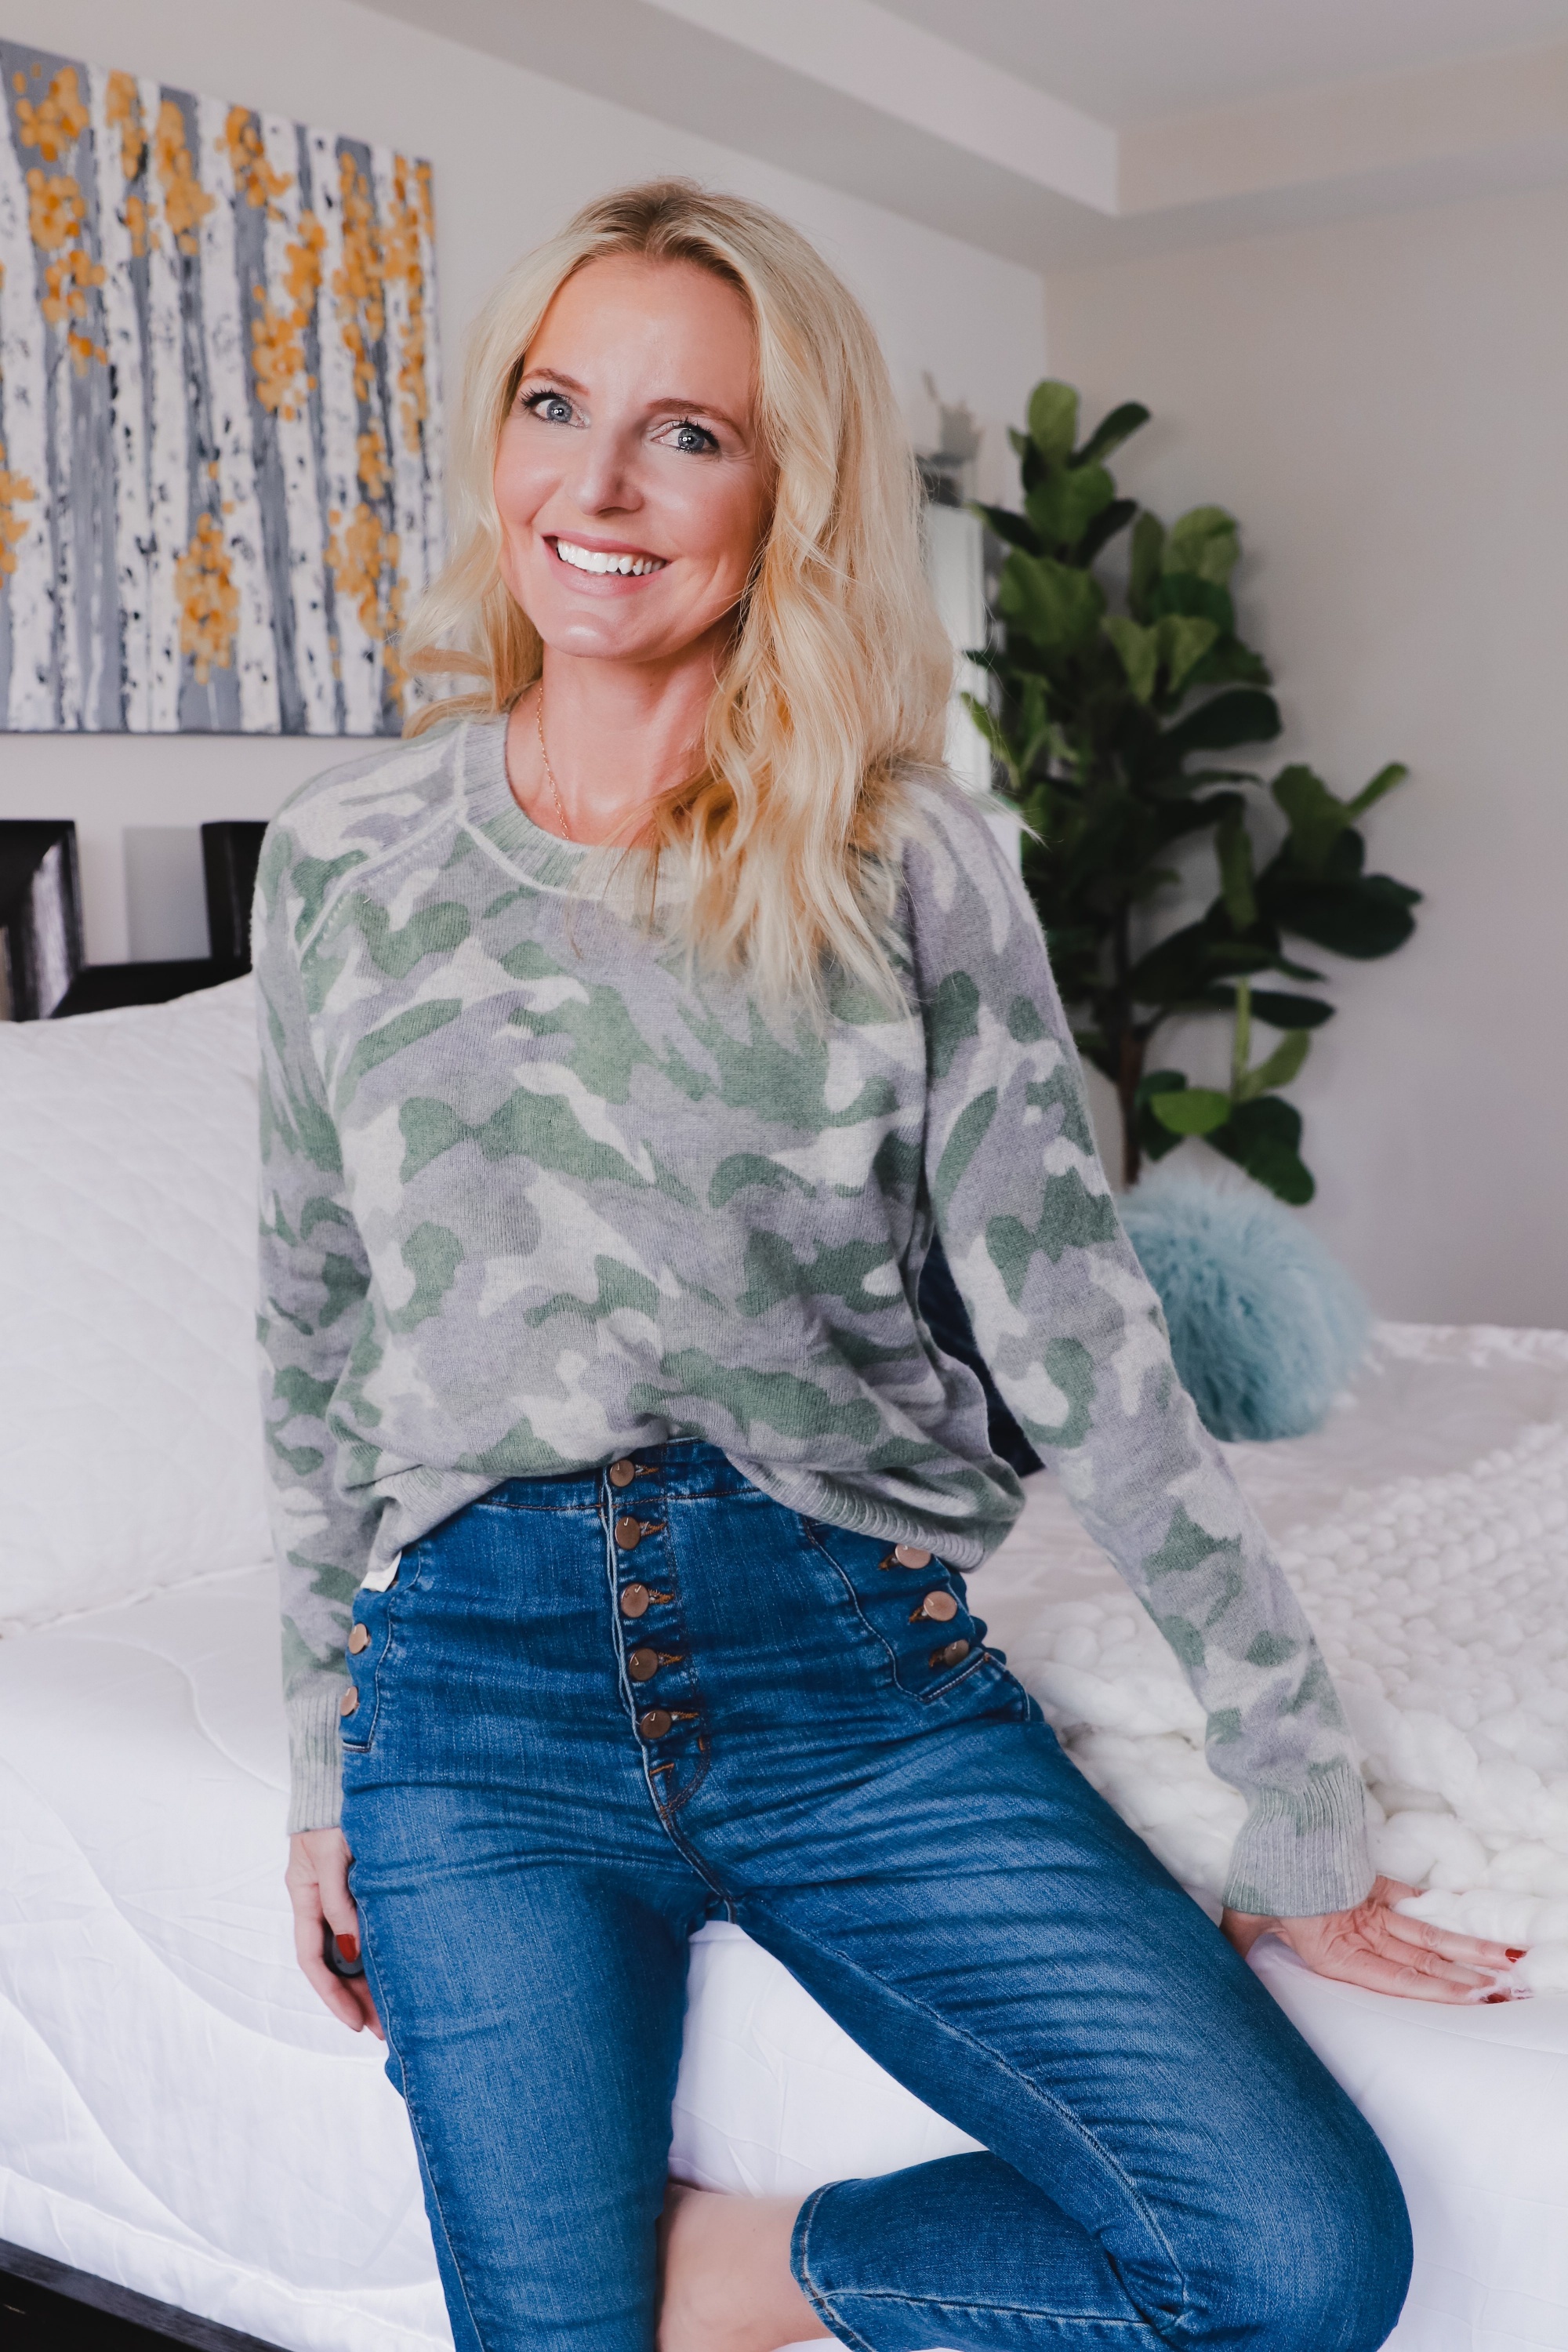 Aqua Cashmere Sweater, Erin Busbee of Busbee Style wearing a green camo cashmere sweater by Aqua from Bloomingdale's untucked from her J Brand Natasha jeans in Telluride, Colorado